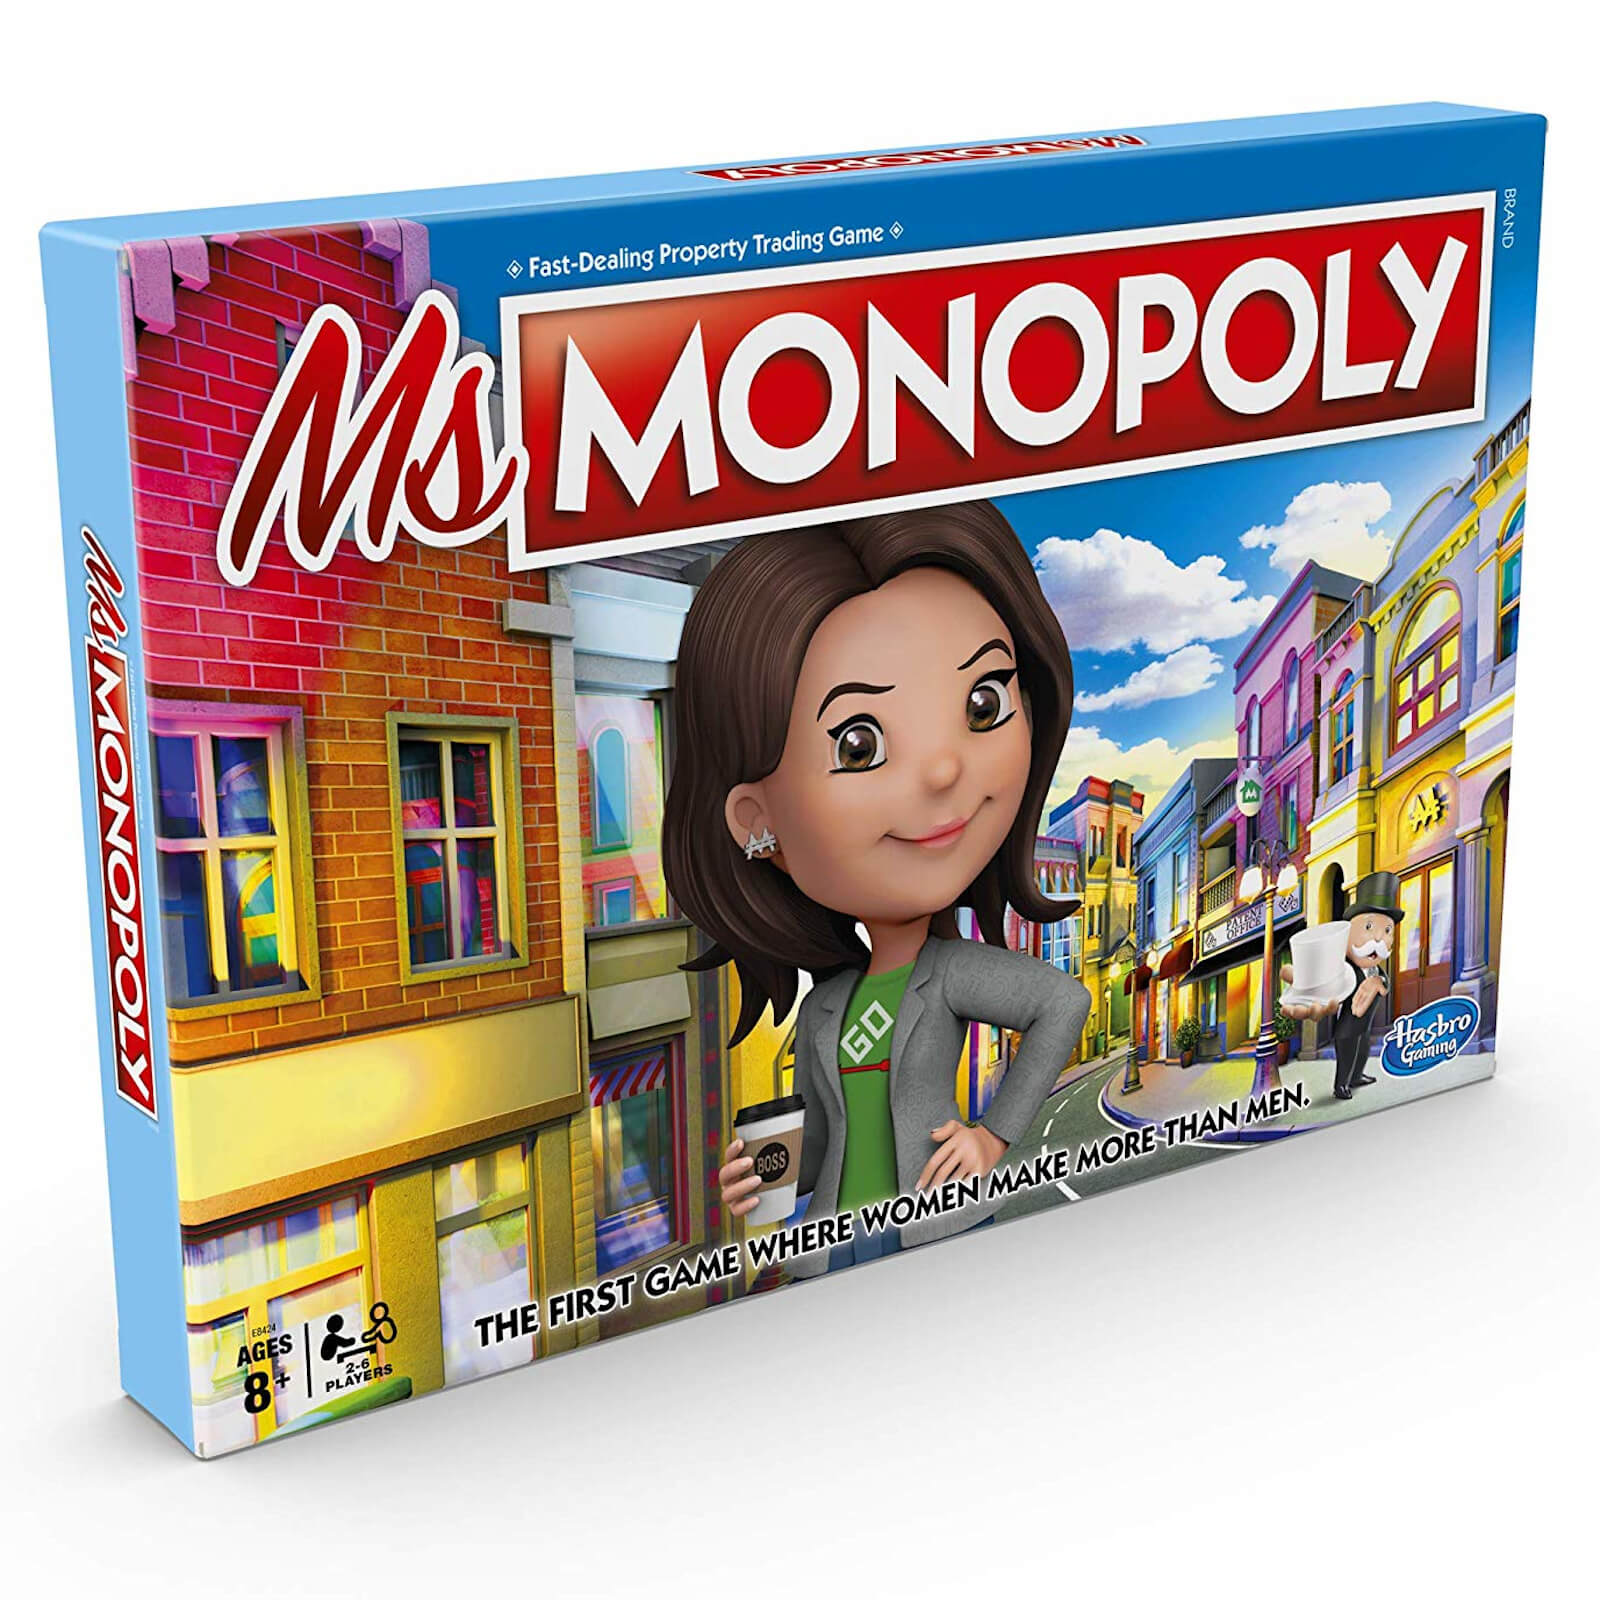 Image of Monopoly - MS Monopoly Edition